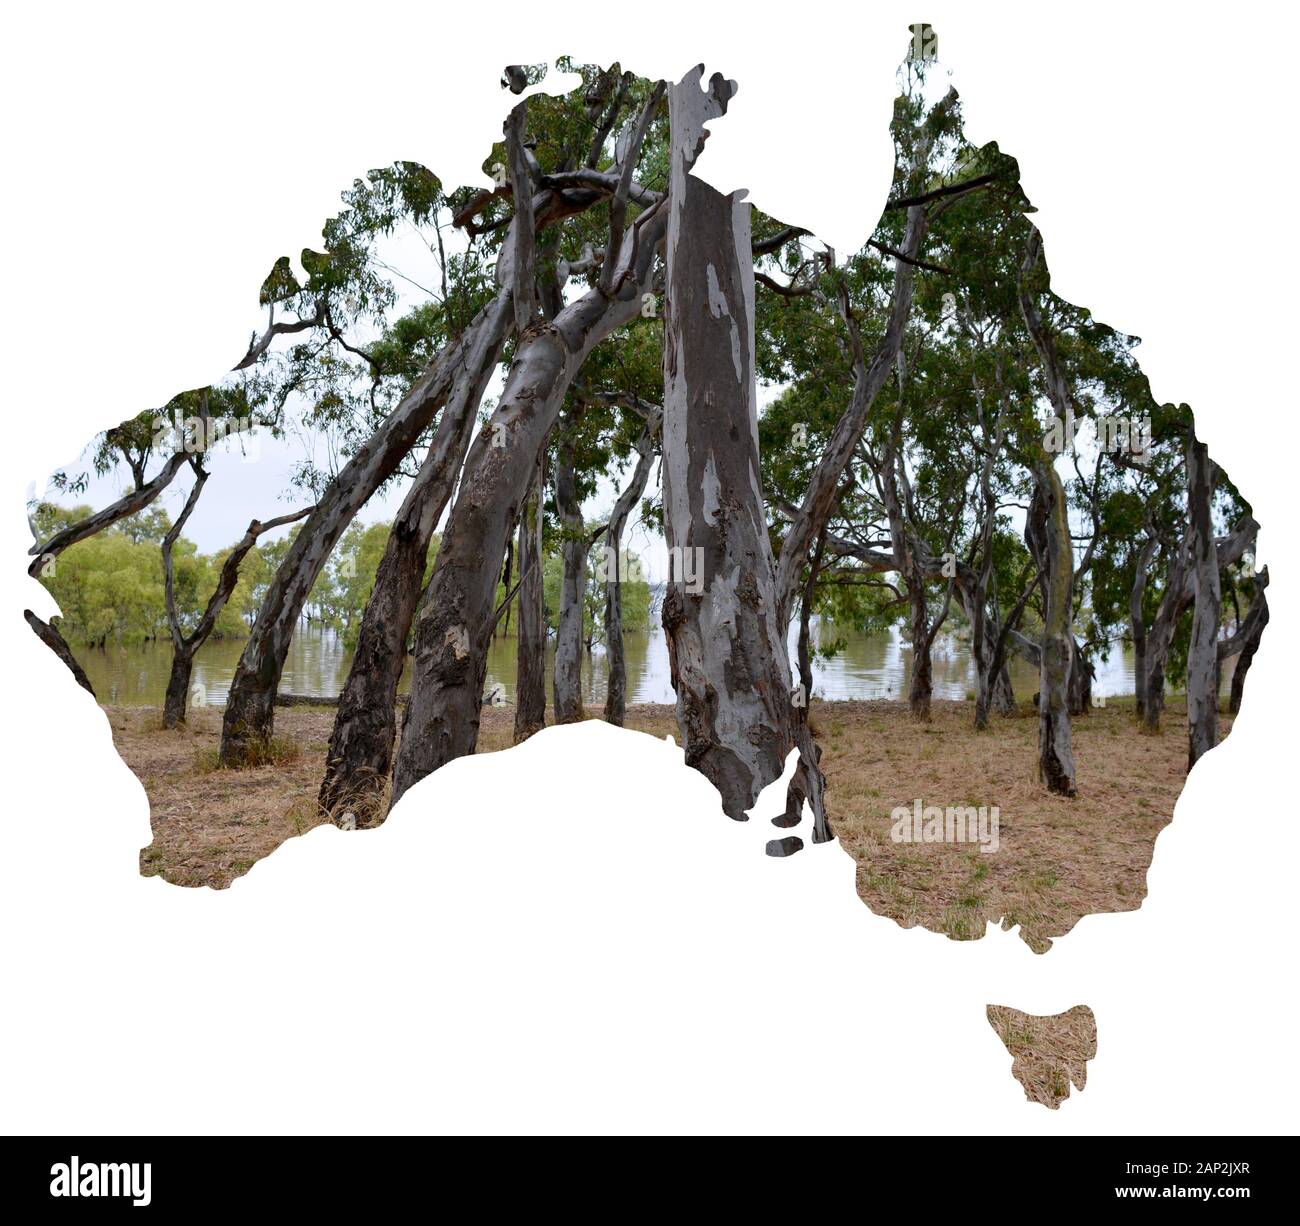 A series of Views of the natural landscapes and scenery of Australia set into a map of the countrycurved trees Stock Photo